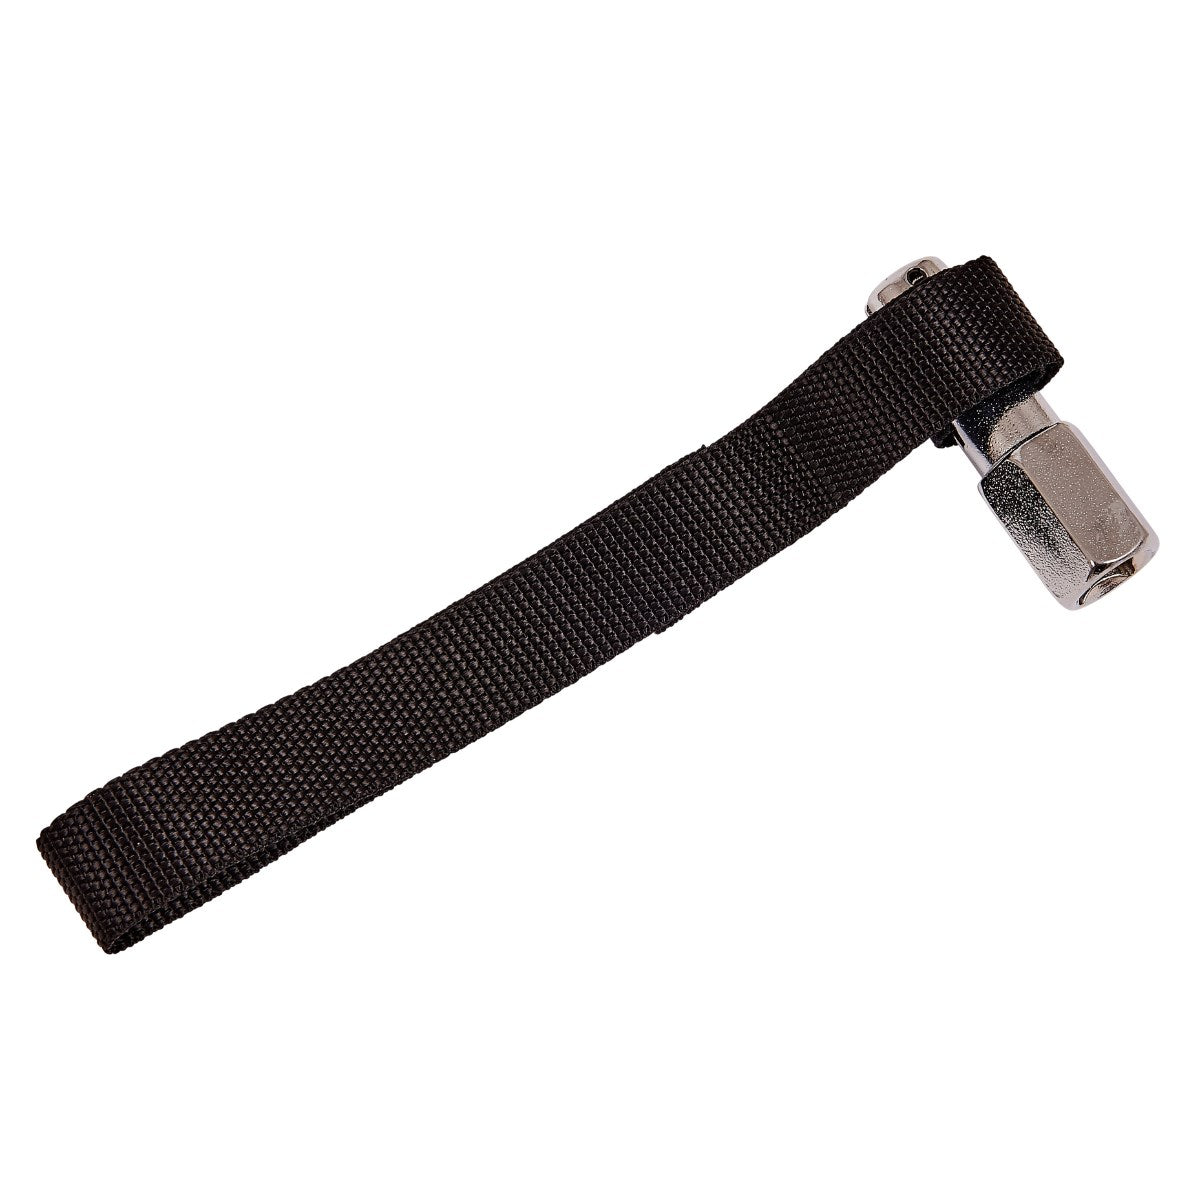 oil filter wrench with strap (J1000)